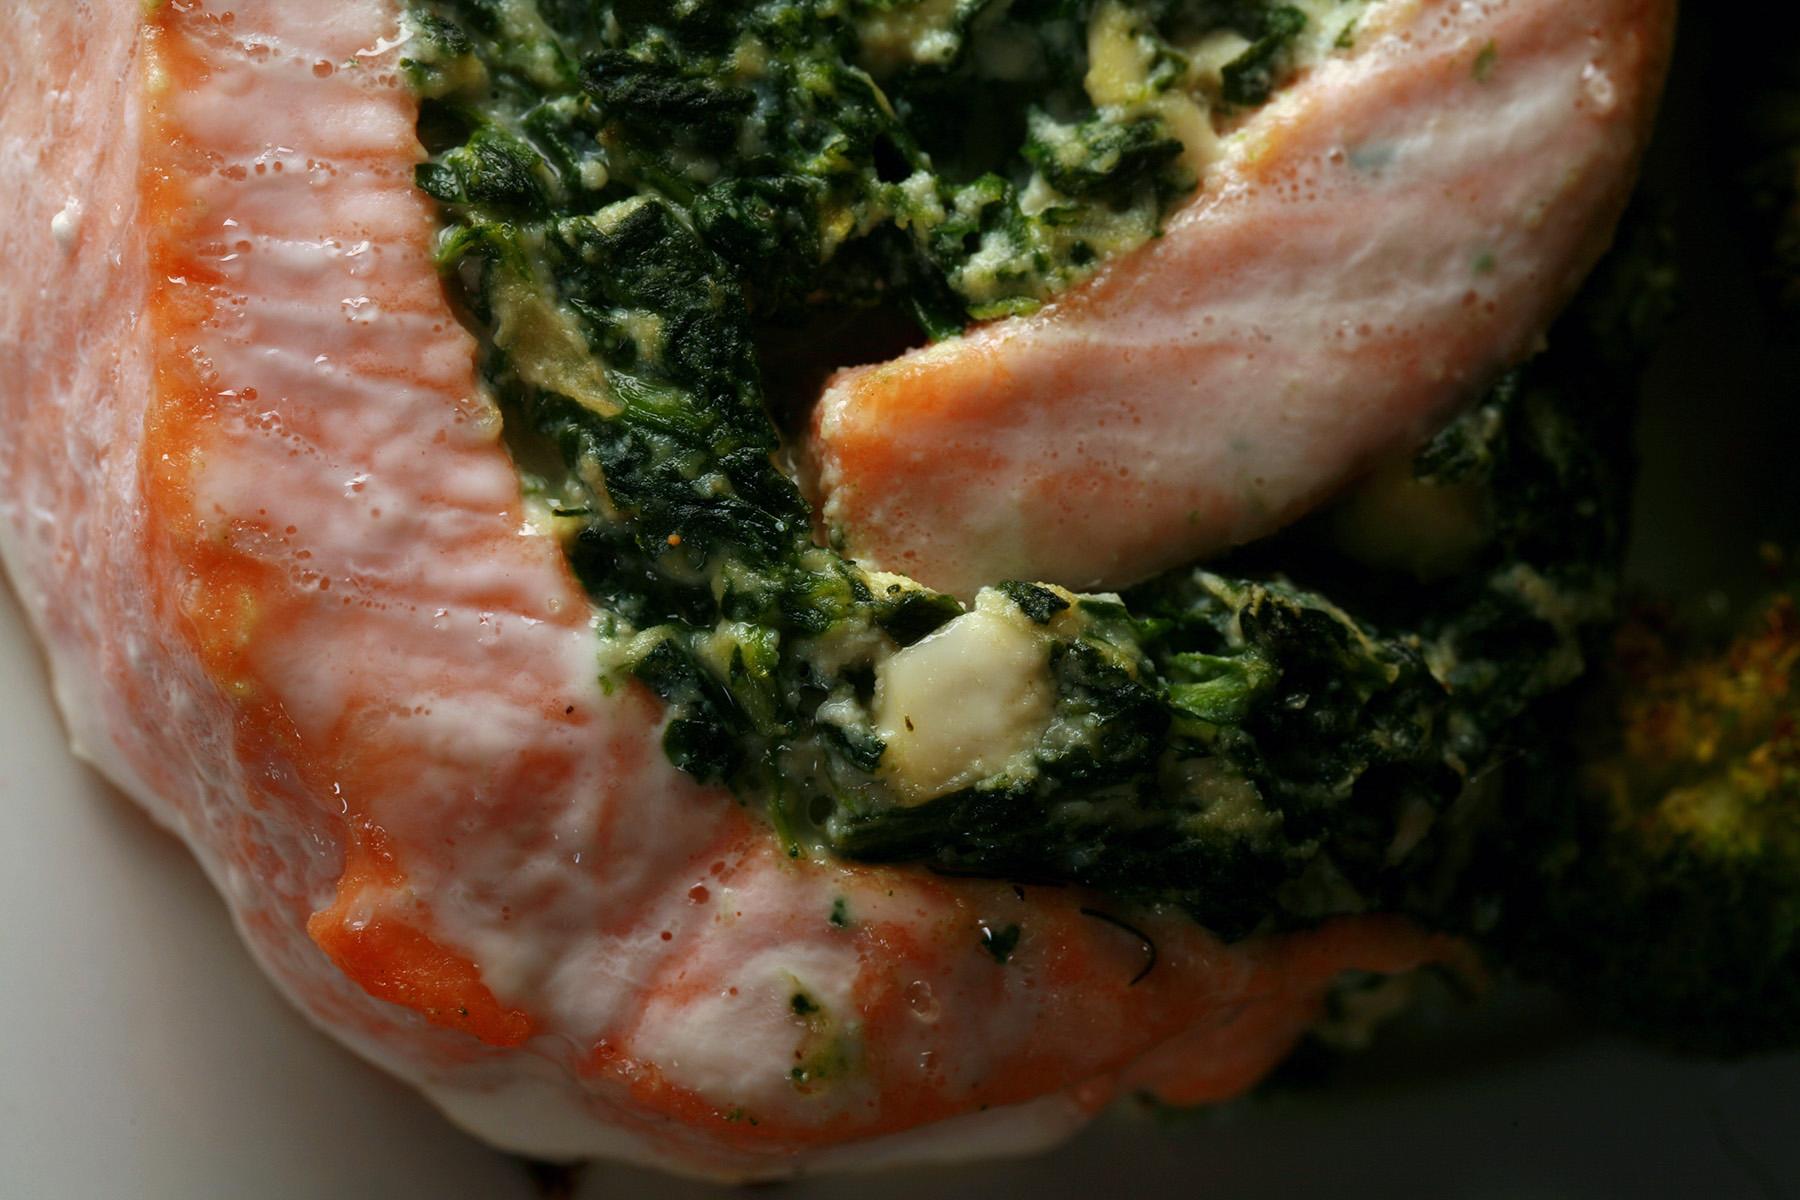 A serving of spinach and feta stuffed salmon, along with some roasted broccoli on a plate.